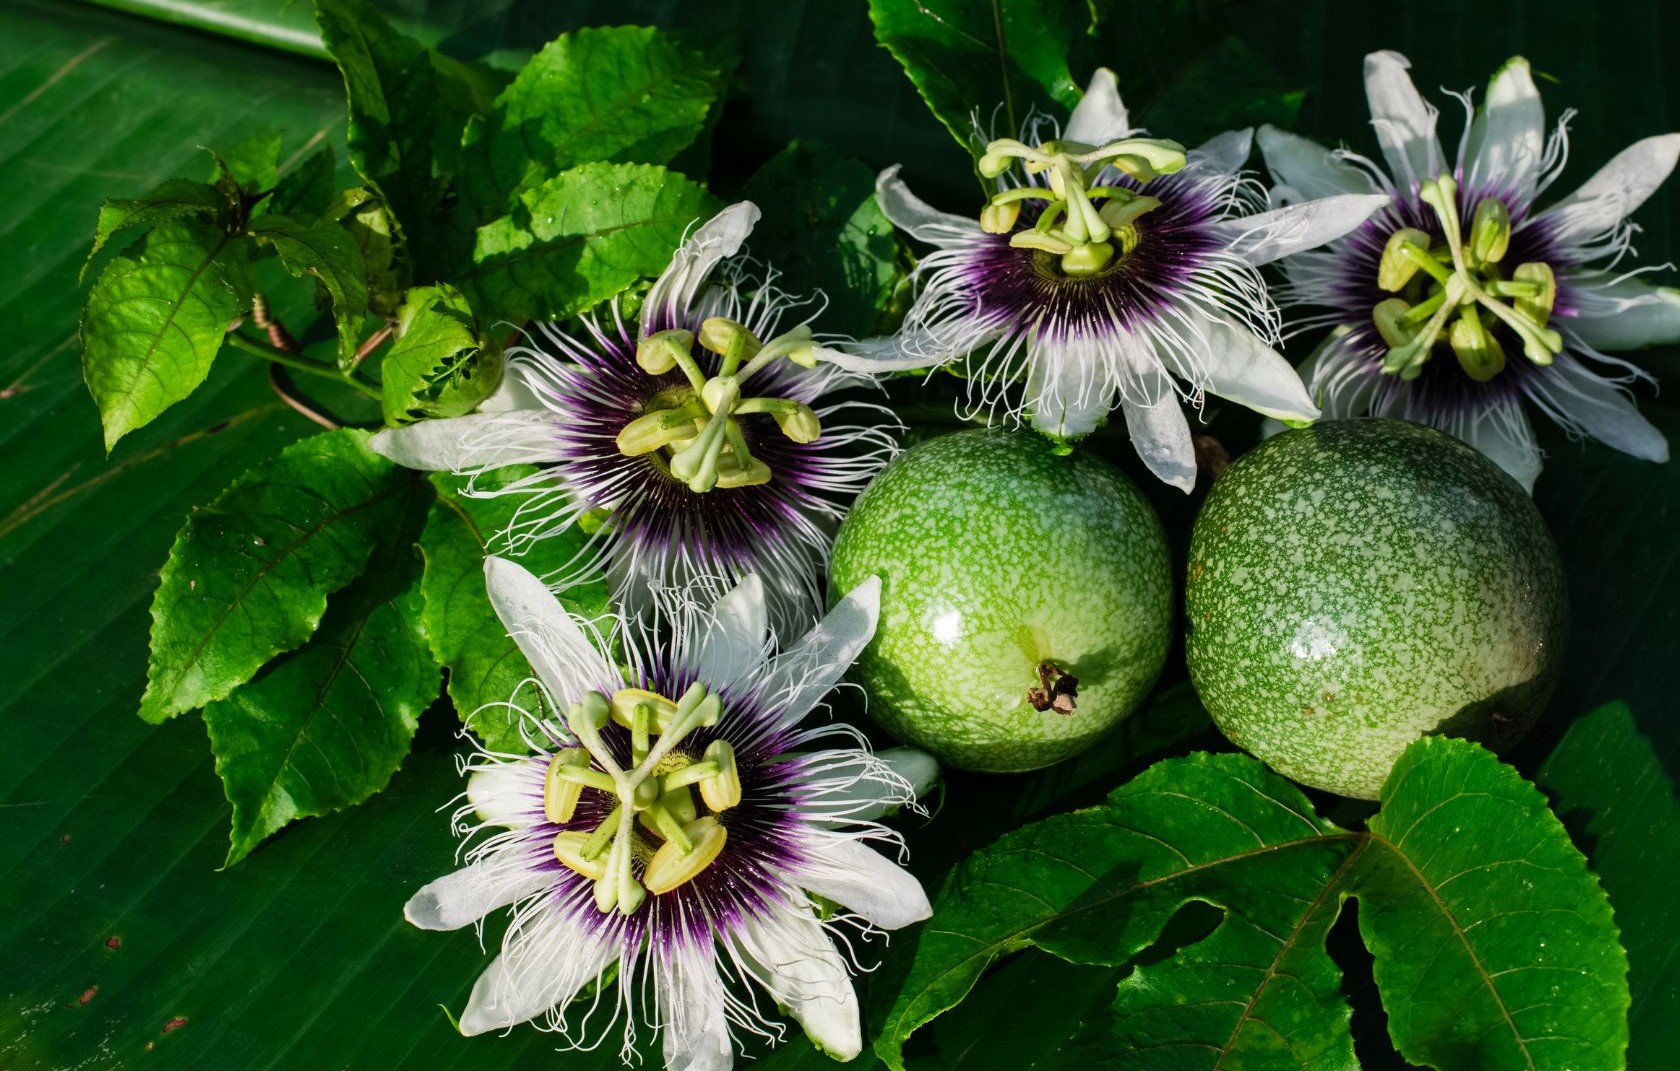 Passion Fruit 101: Buying, Eating, Health Benefits and More!